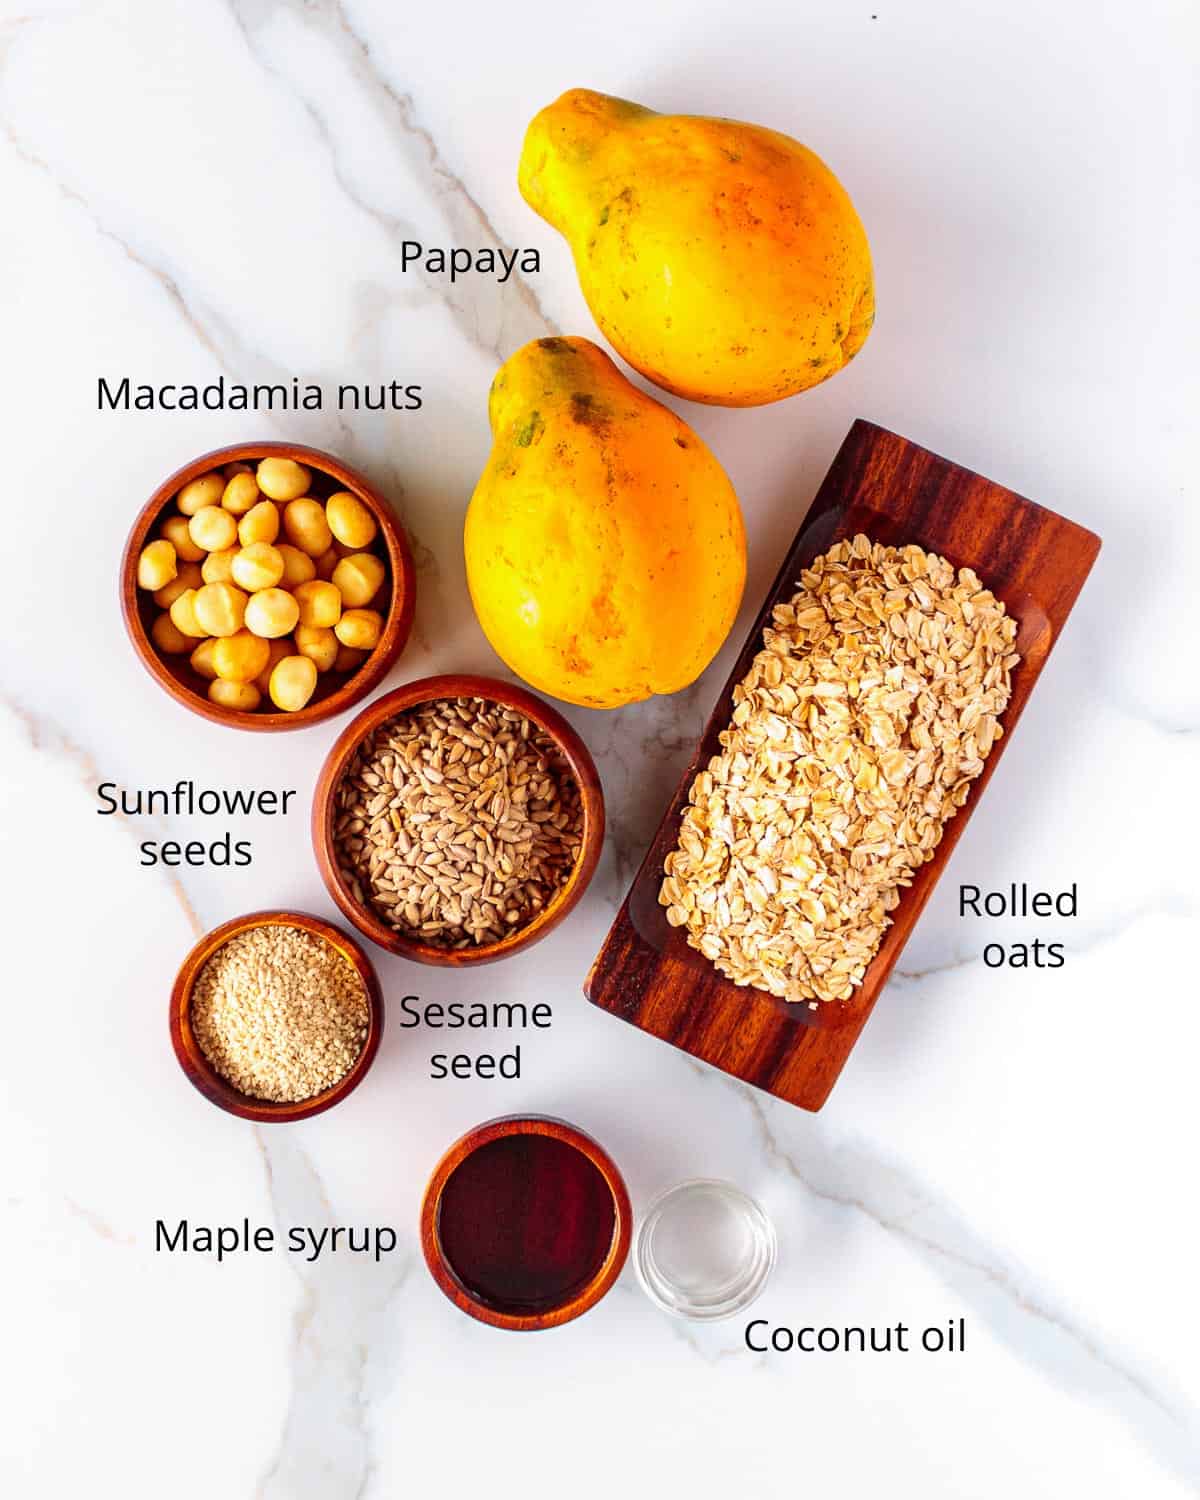 Whole papaya, macadamia, sunflower seed, sesame seed, oats, maple syrup and coconut oil in dishes.